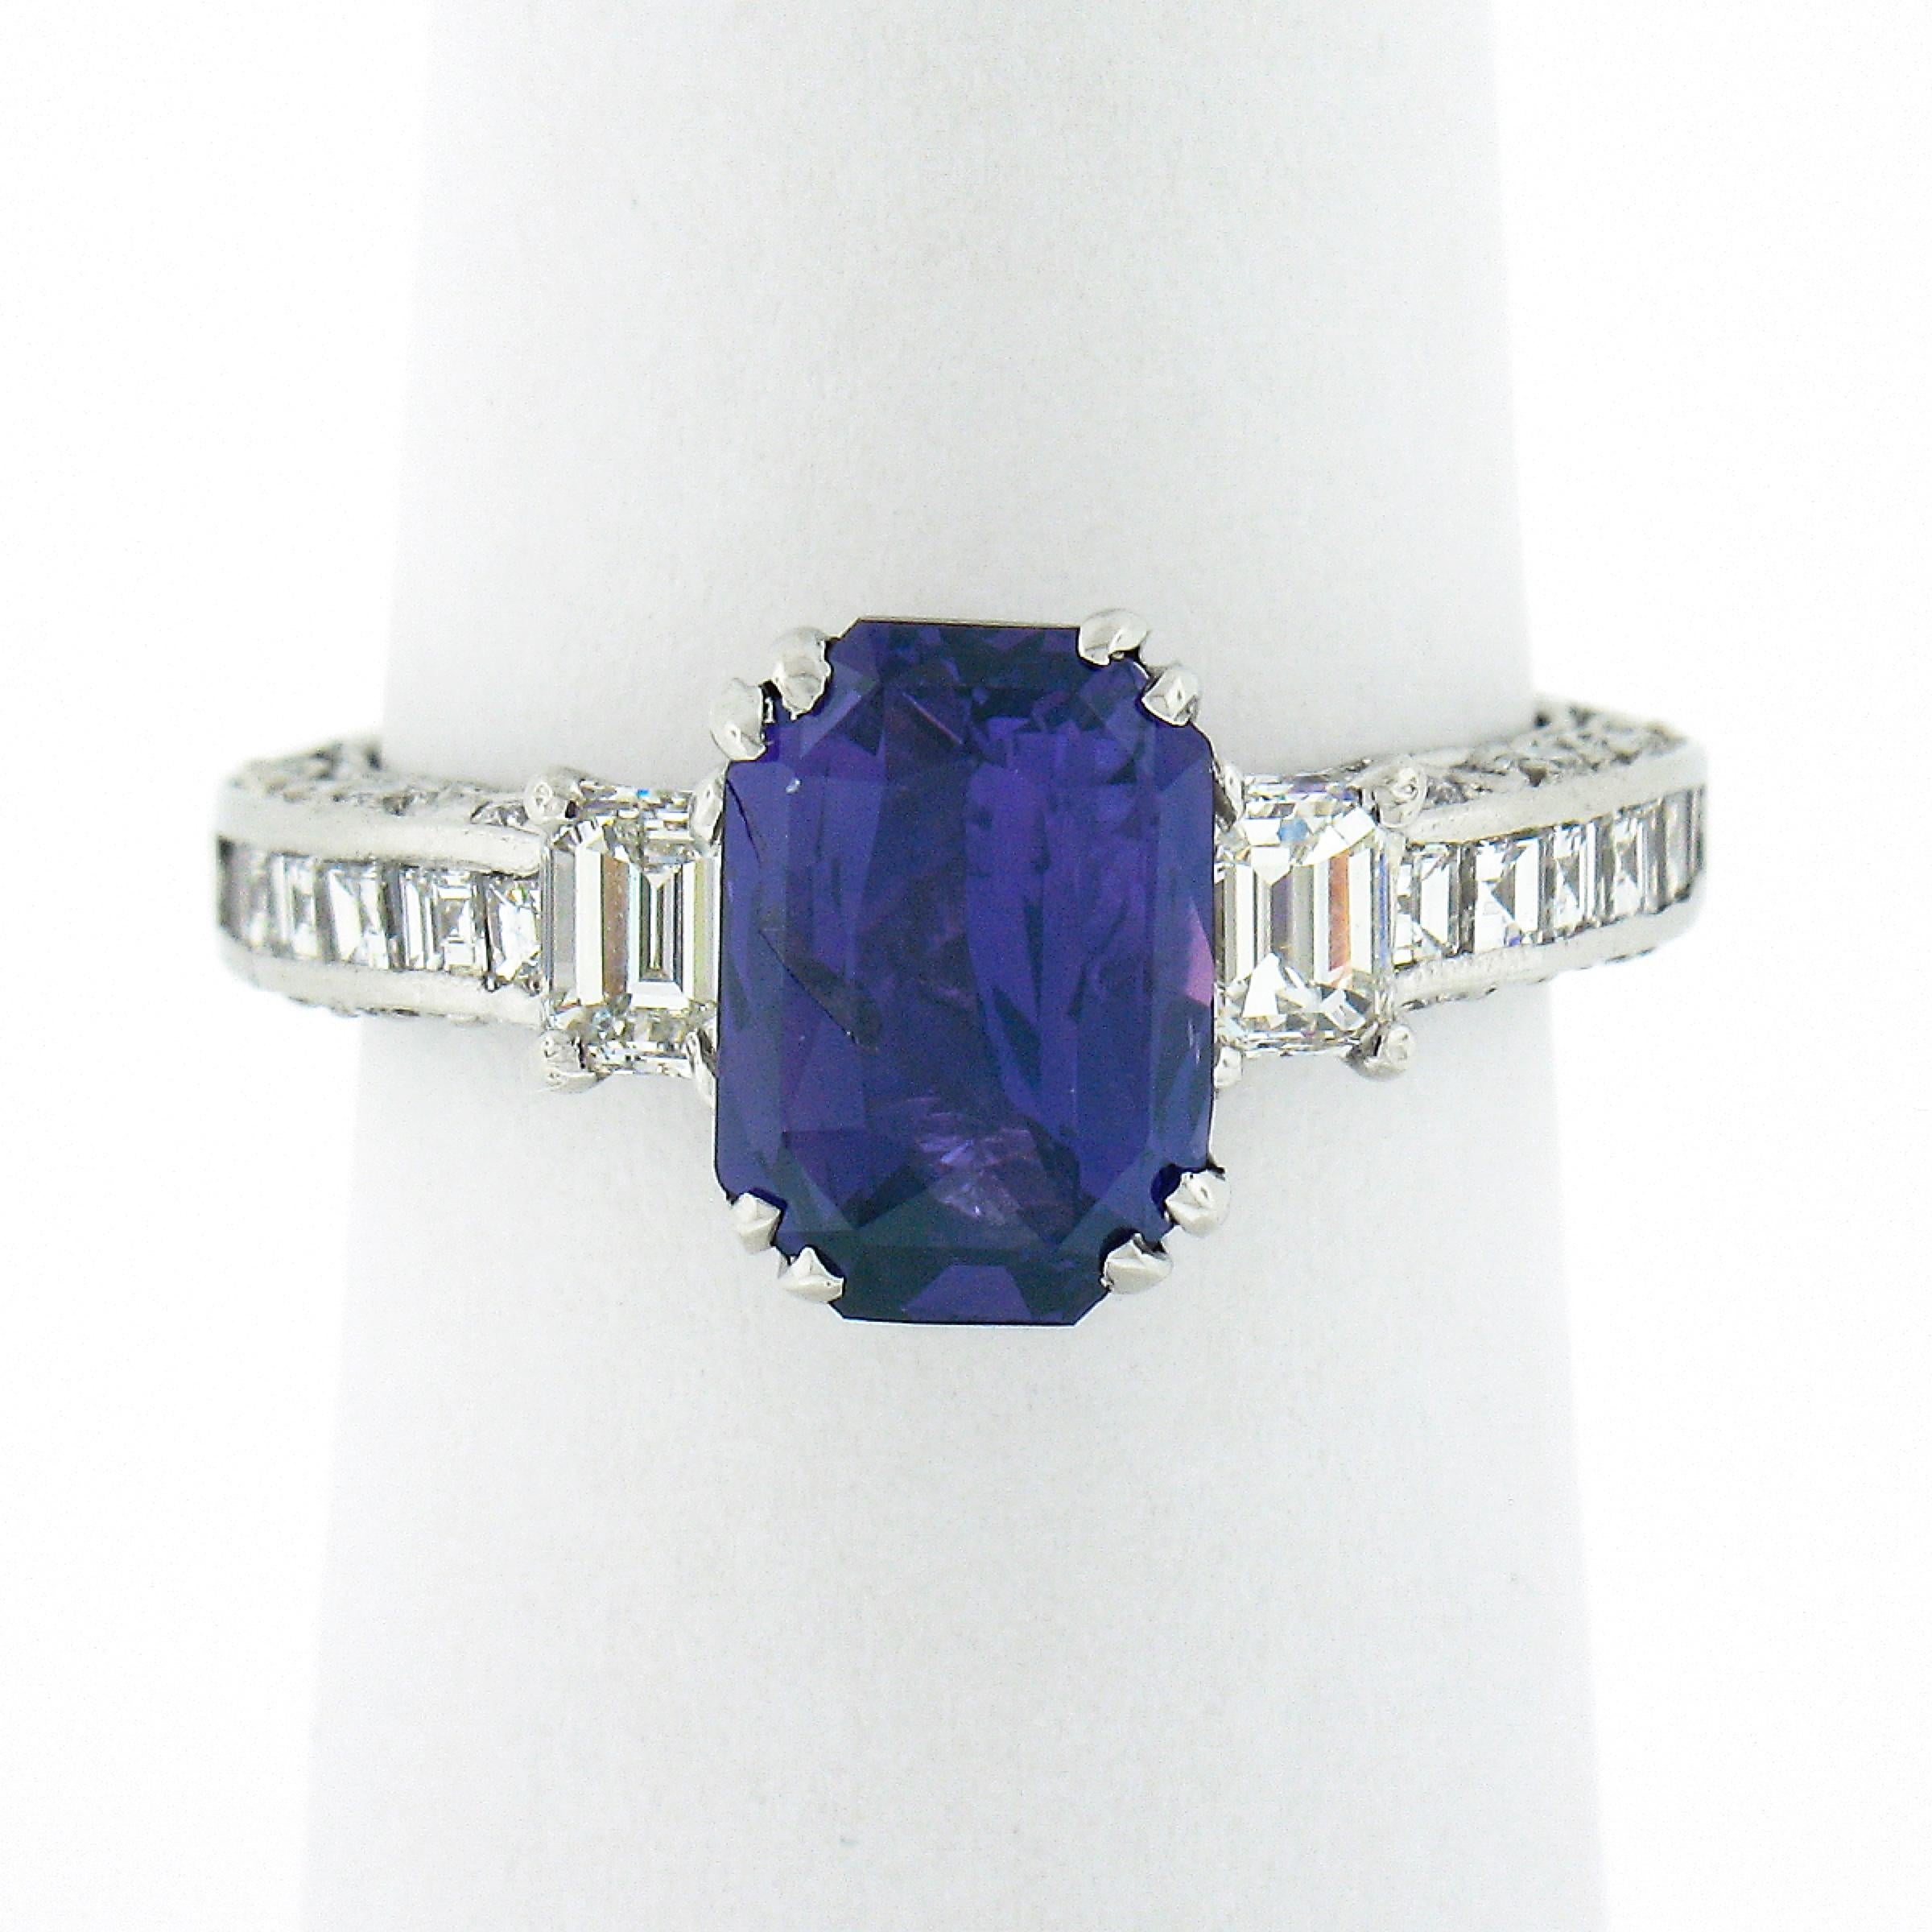 This magnificent and very chic cocktail or engagement style ring is crafted in solid platinum and was designed by Tacori. It features a truly breathtaking, GIA certified, emerald cut sapphire solitaire neatly dual prong set at its center. The stone